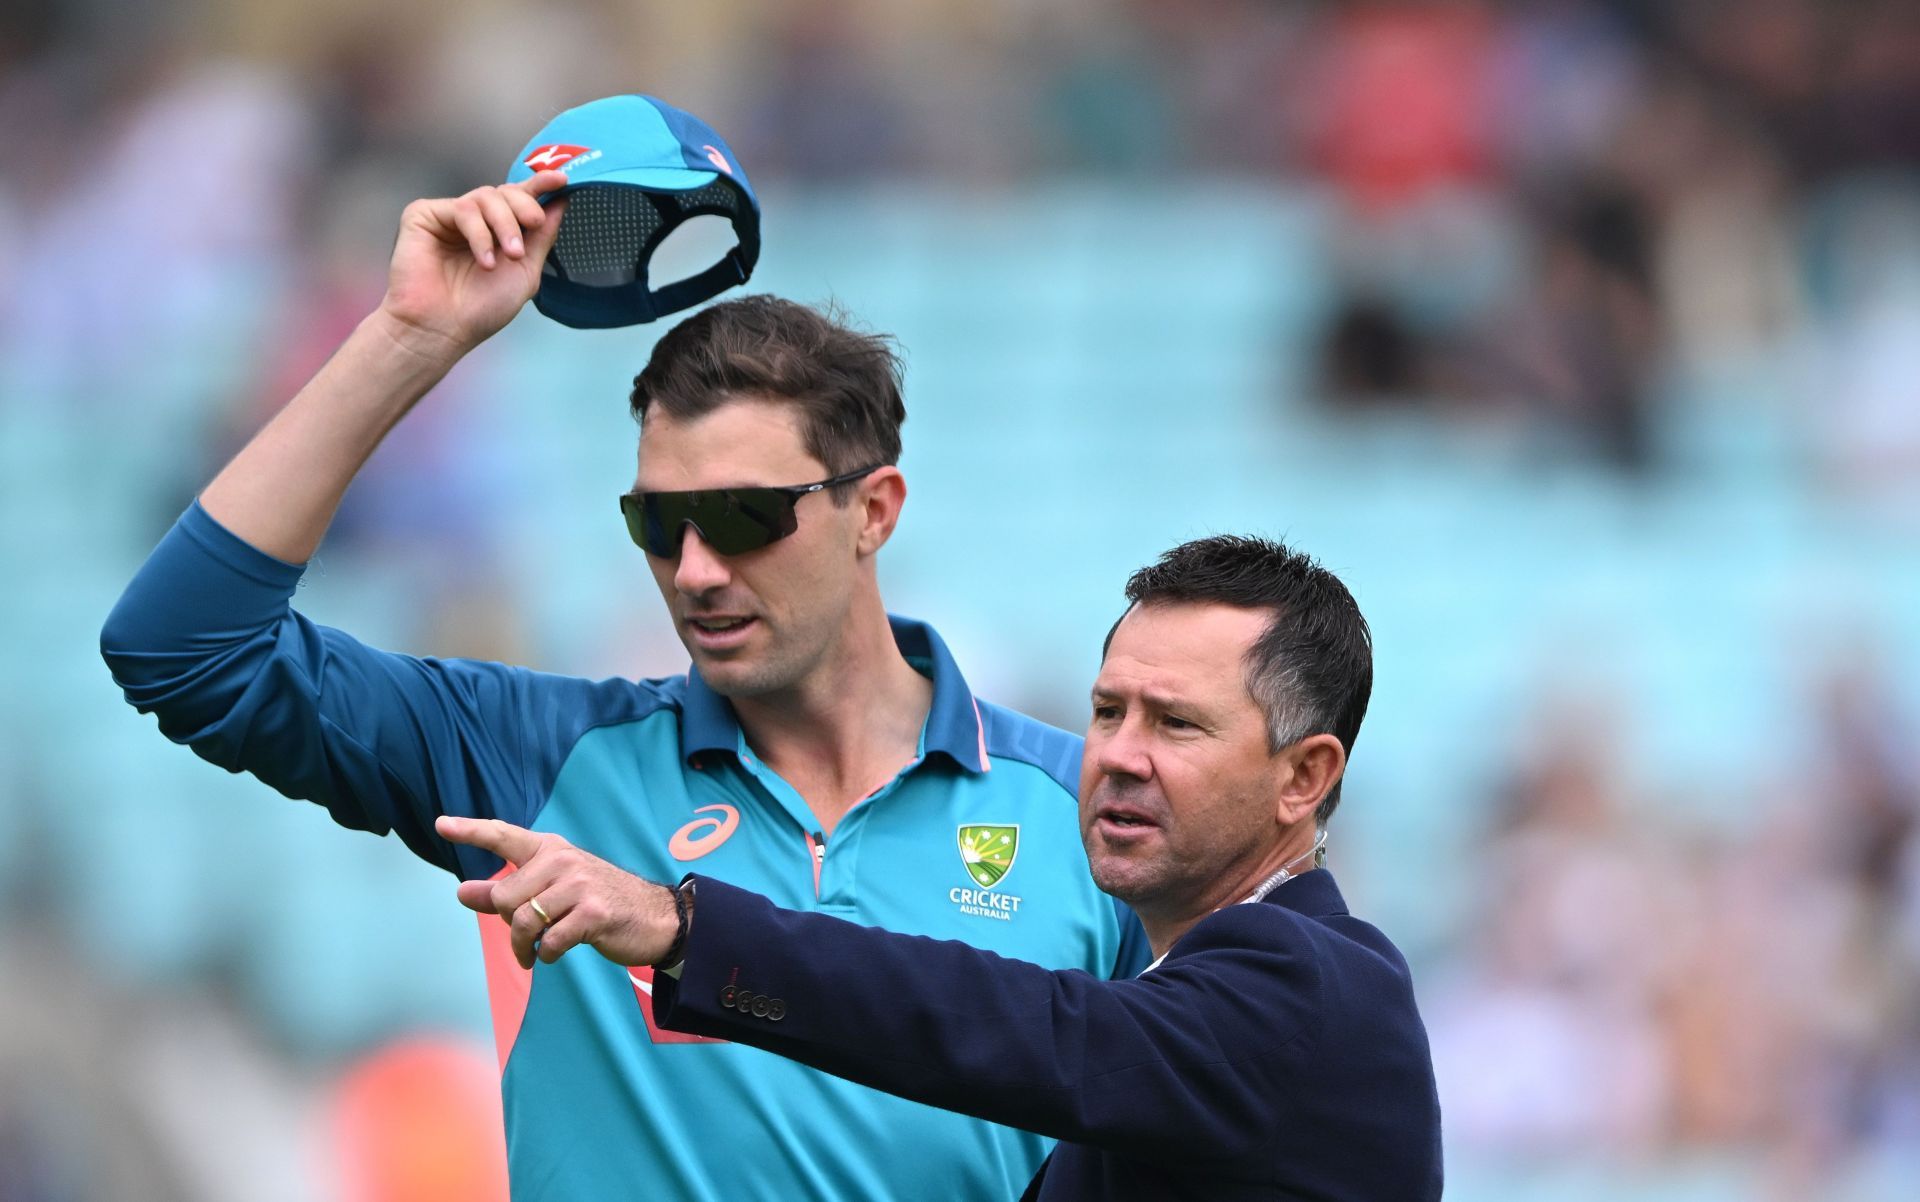 Ricky Ponting has been coaching various teams since the last decade